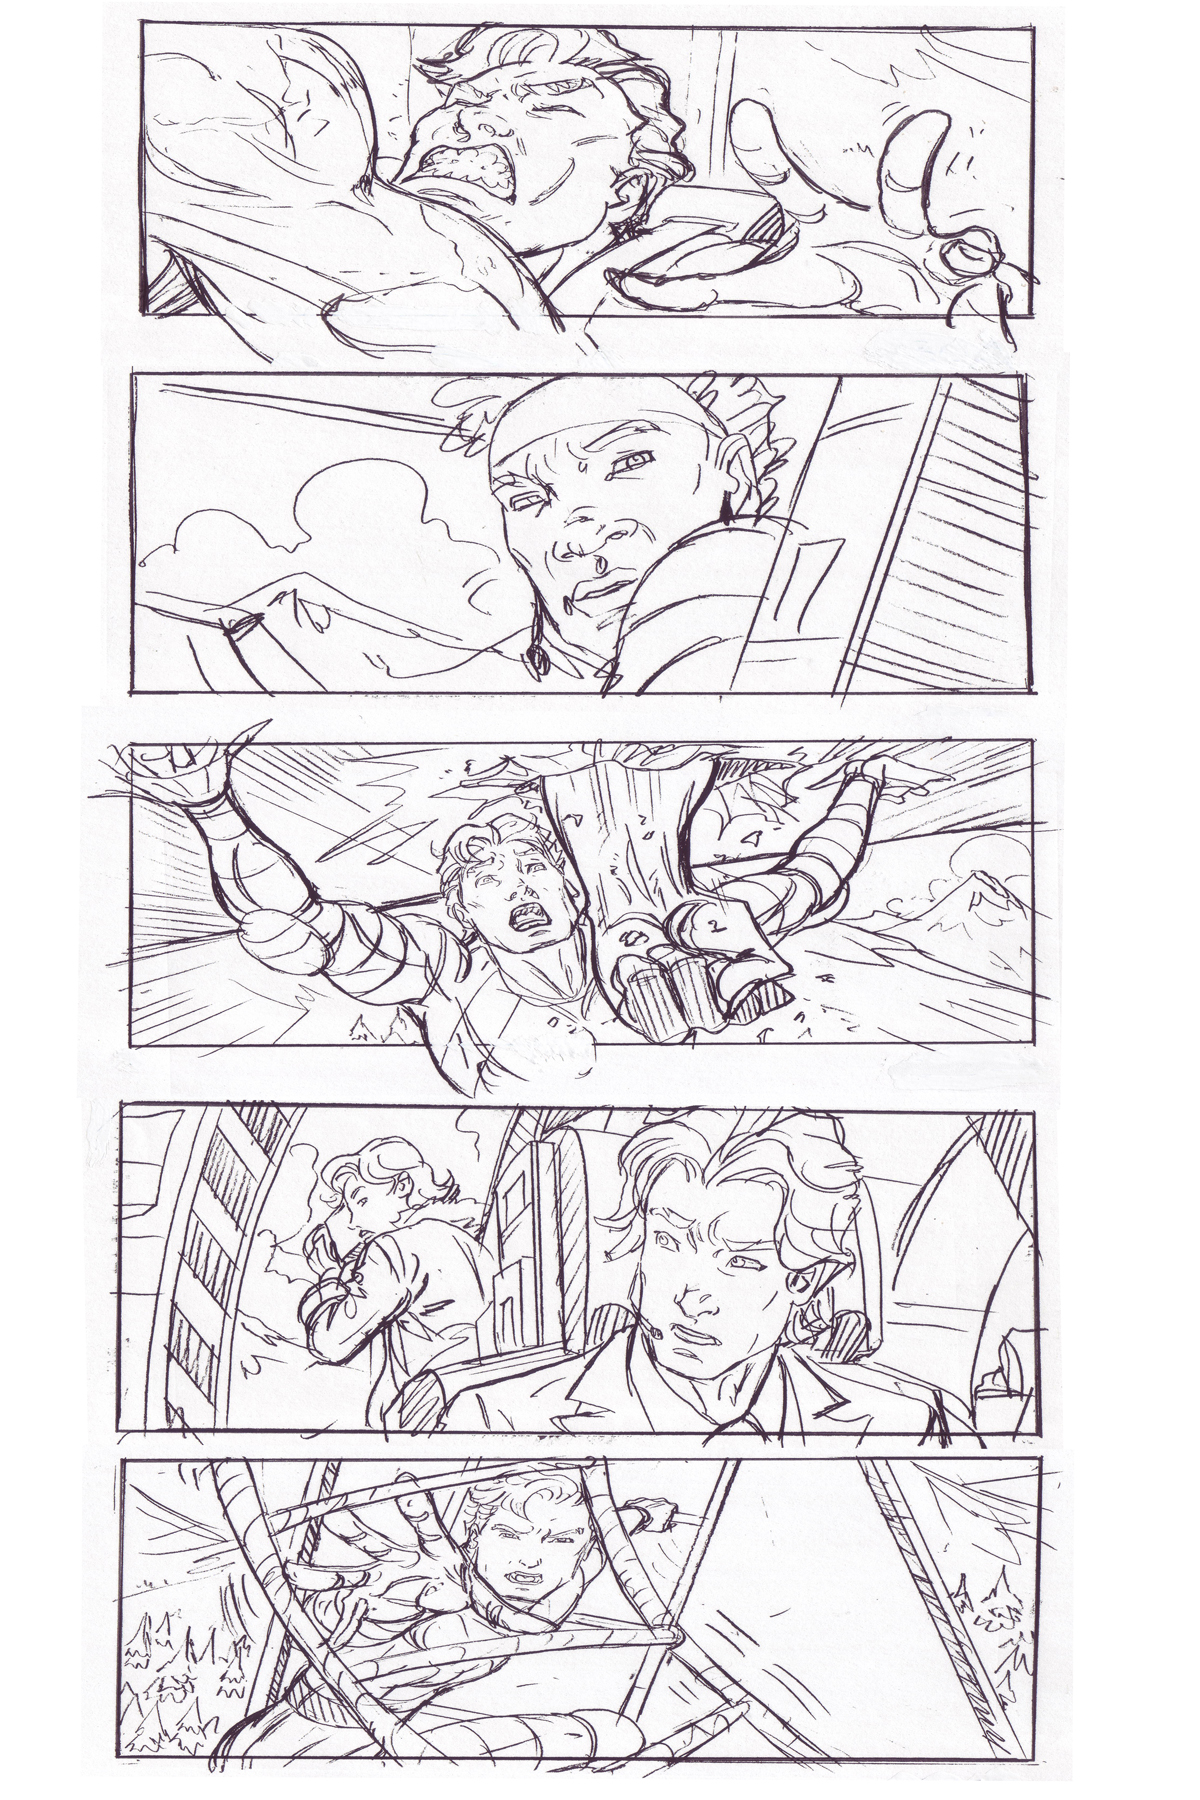 Action Man Storyboards.